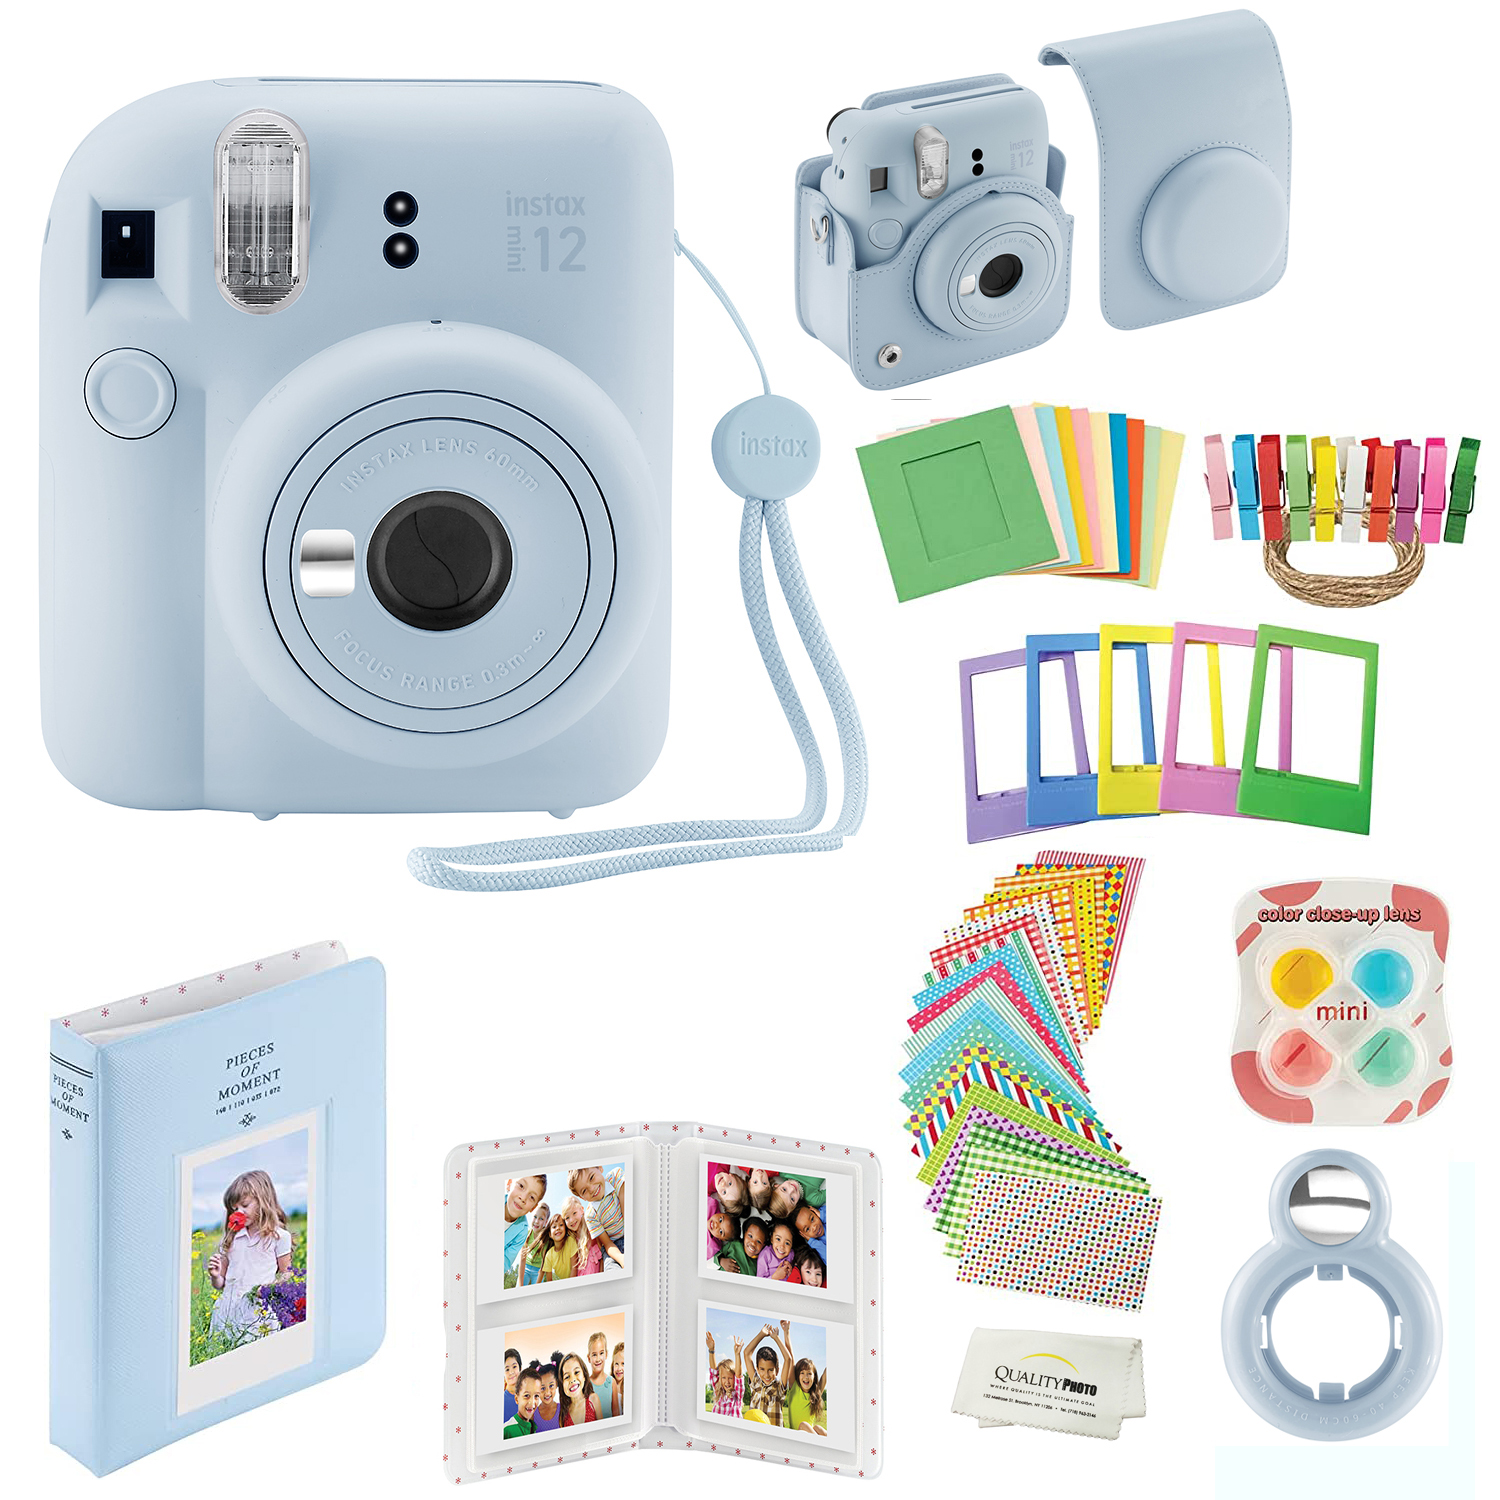 Fujifilm Instax Mini 12 Instant Camera with Case, Decoration Stickers, Frames, Photo Album and More Accessory kit (Pastel Blue) - image 1 of 8